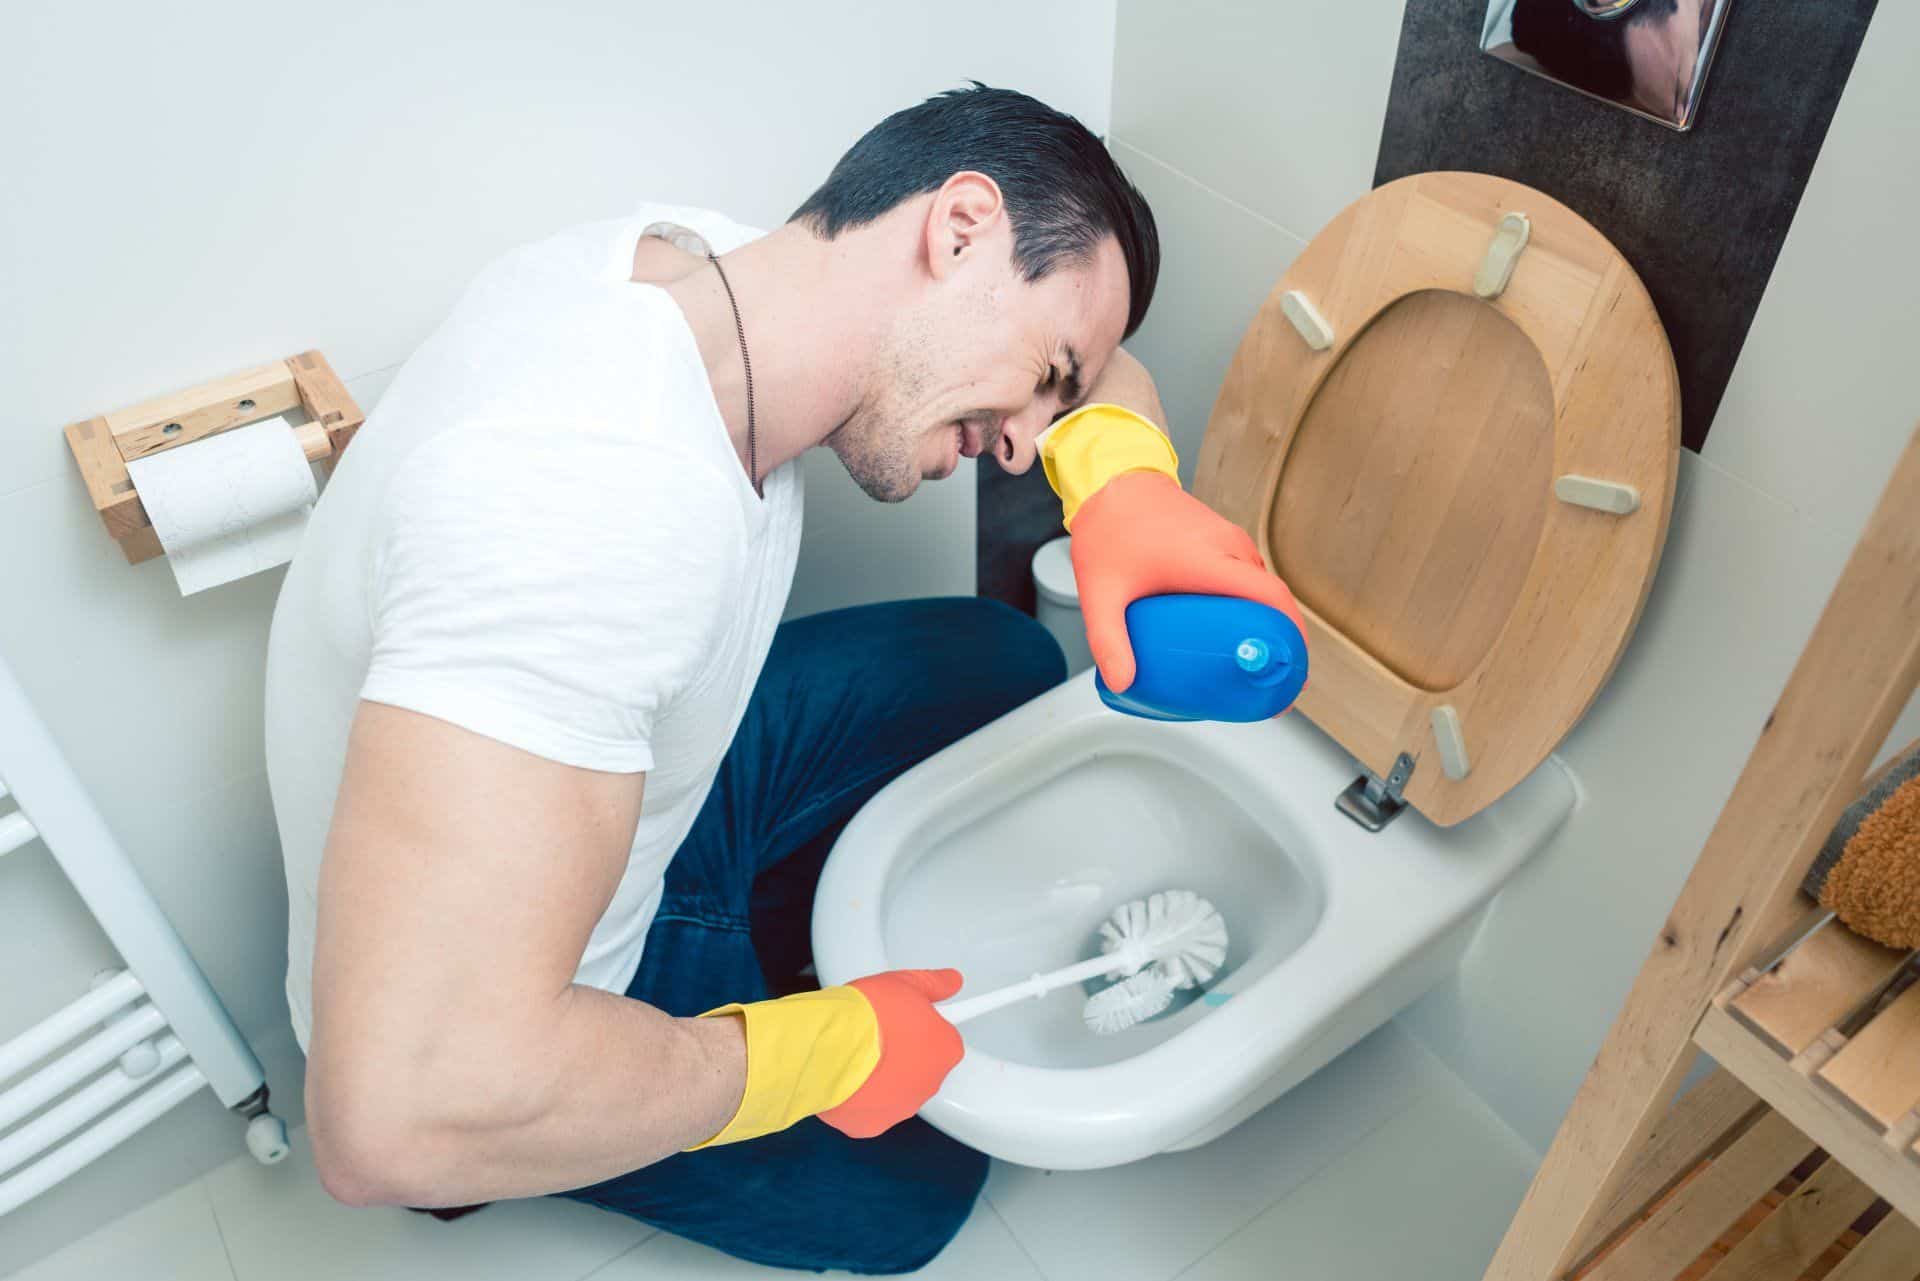 man having a difficult time cleaning a toilet